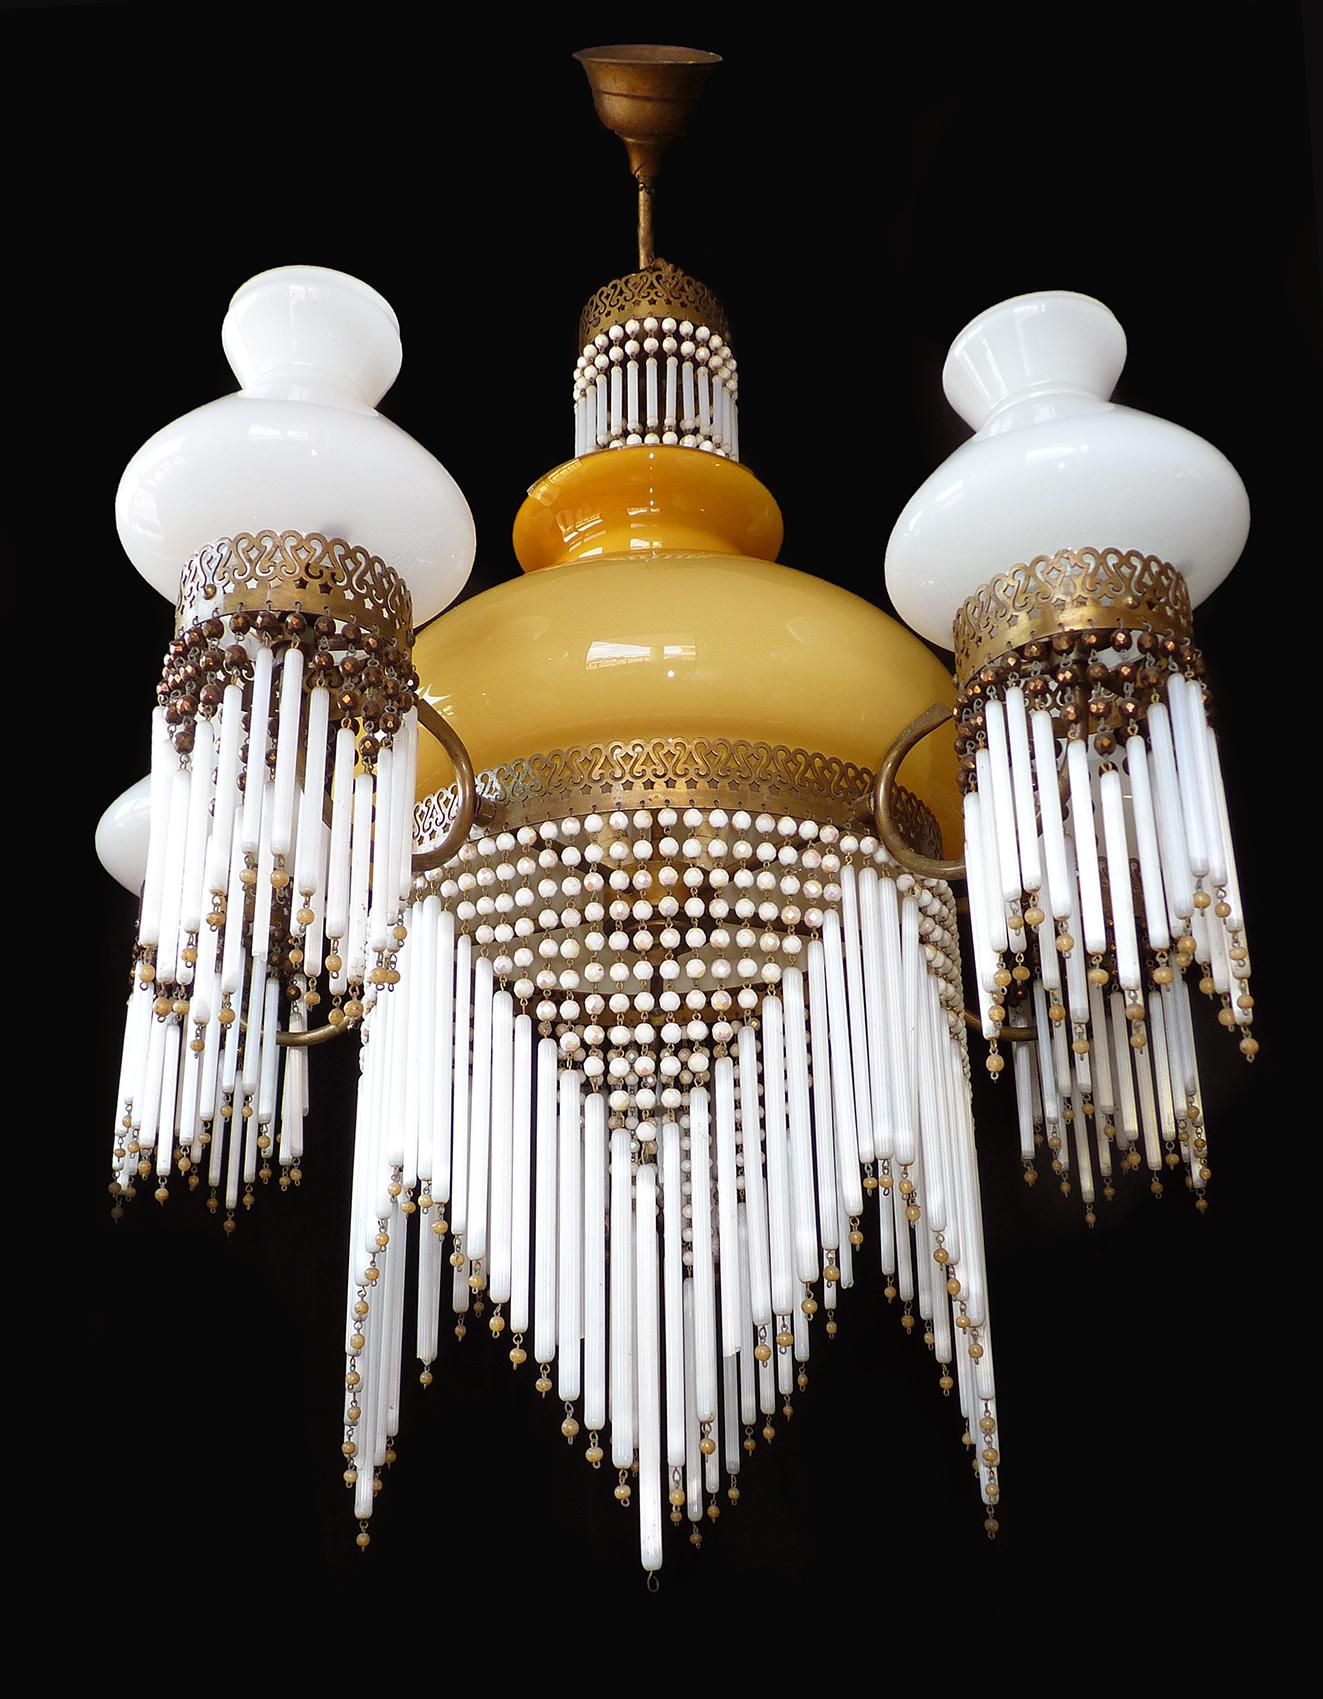 Large French Art Nouveau Art Deco Amber Glass Beaded Fringe Gilt Chandelier 1930 In Good Condition For Sale In Coimbra, PT